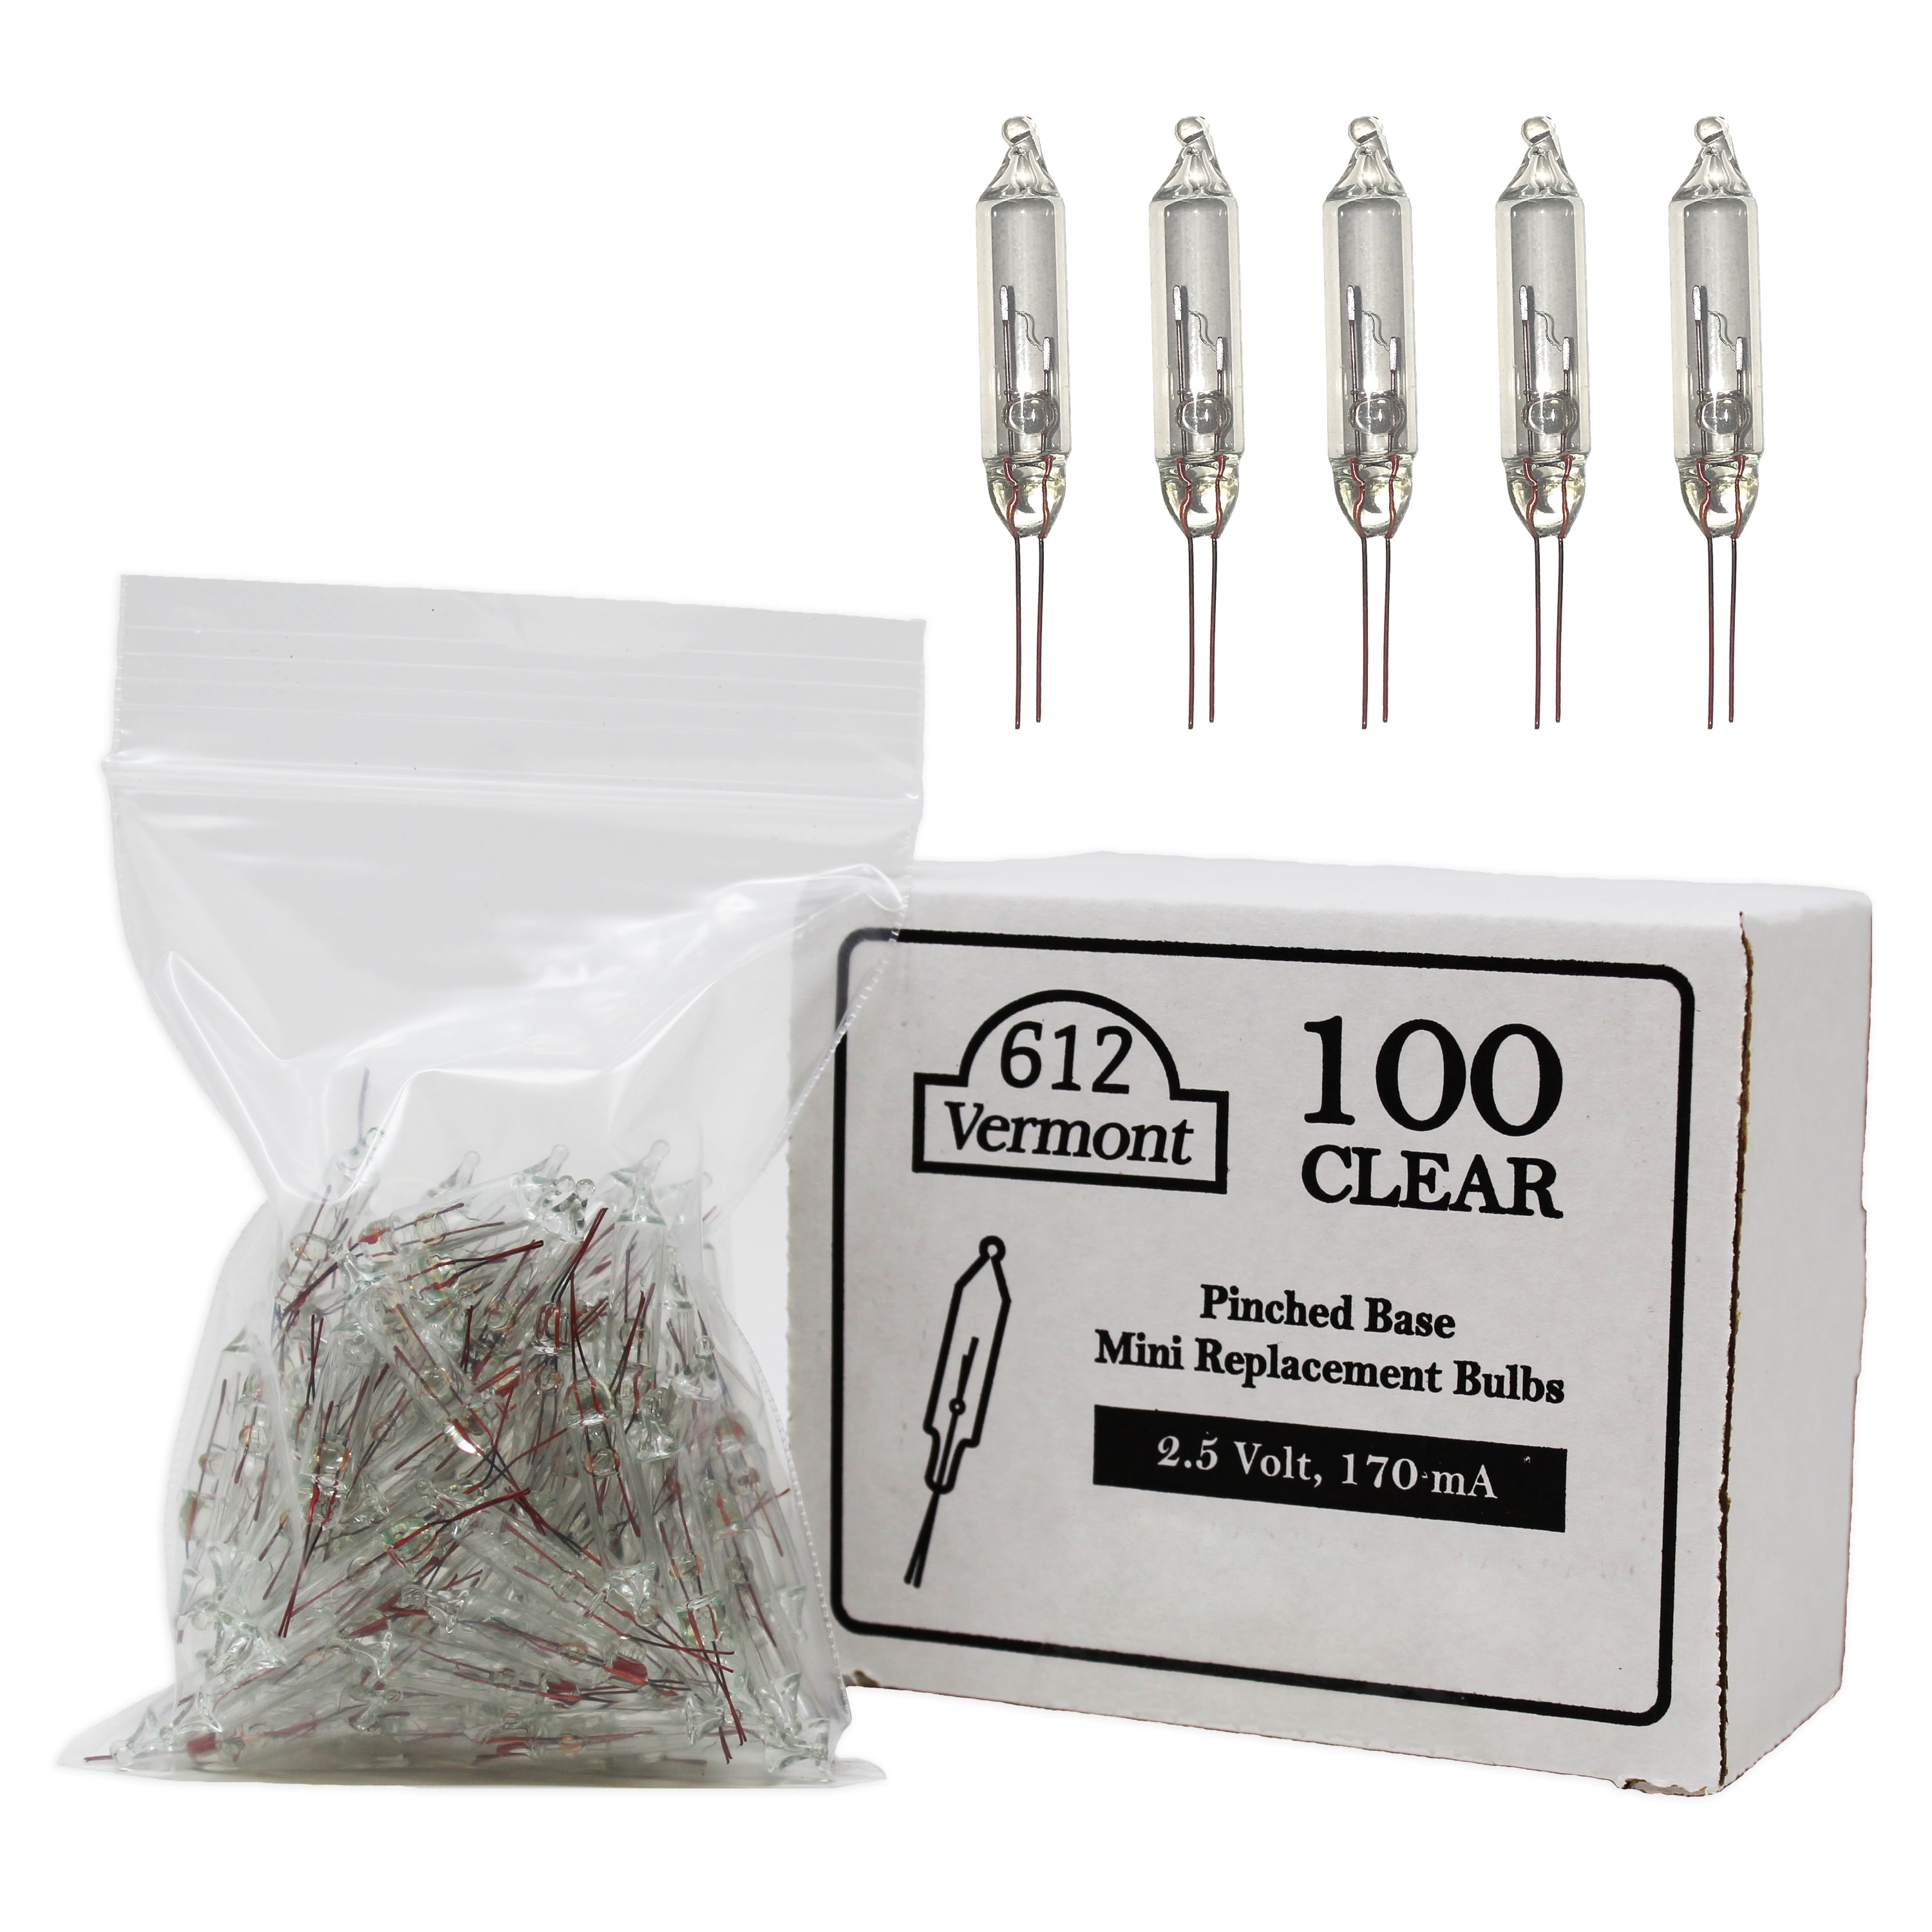 Green Base Check and Make Sure What Type/Size/Shape Base You Need for Your String!! 20 Cool White M5 Icicle LED Replacement Bulbs